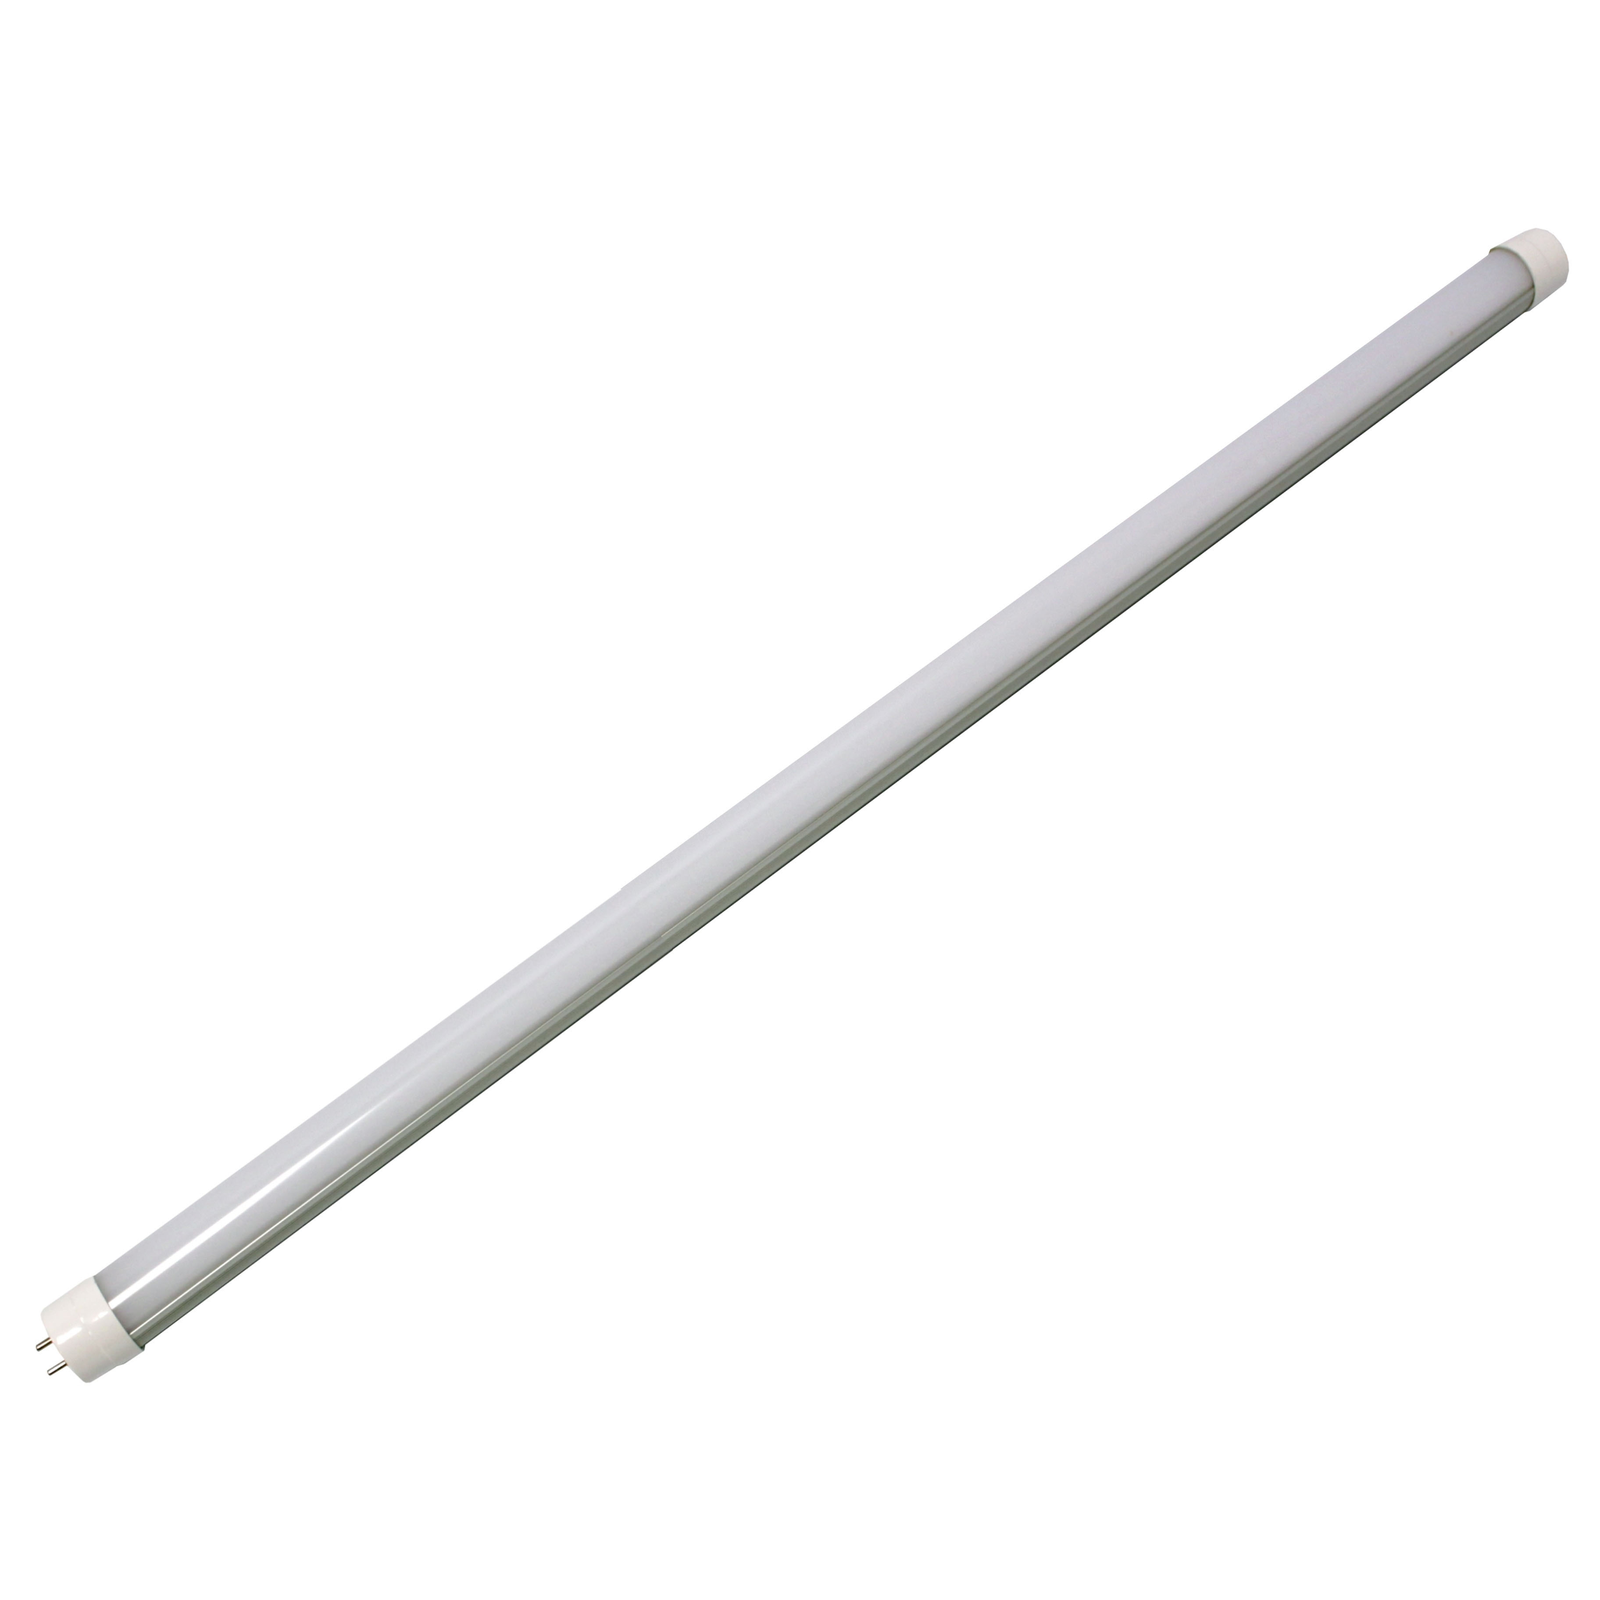 LED tube T8 G13 230VAC 9W white day 6000-6500K 26x600mm Cablematic